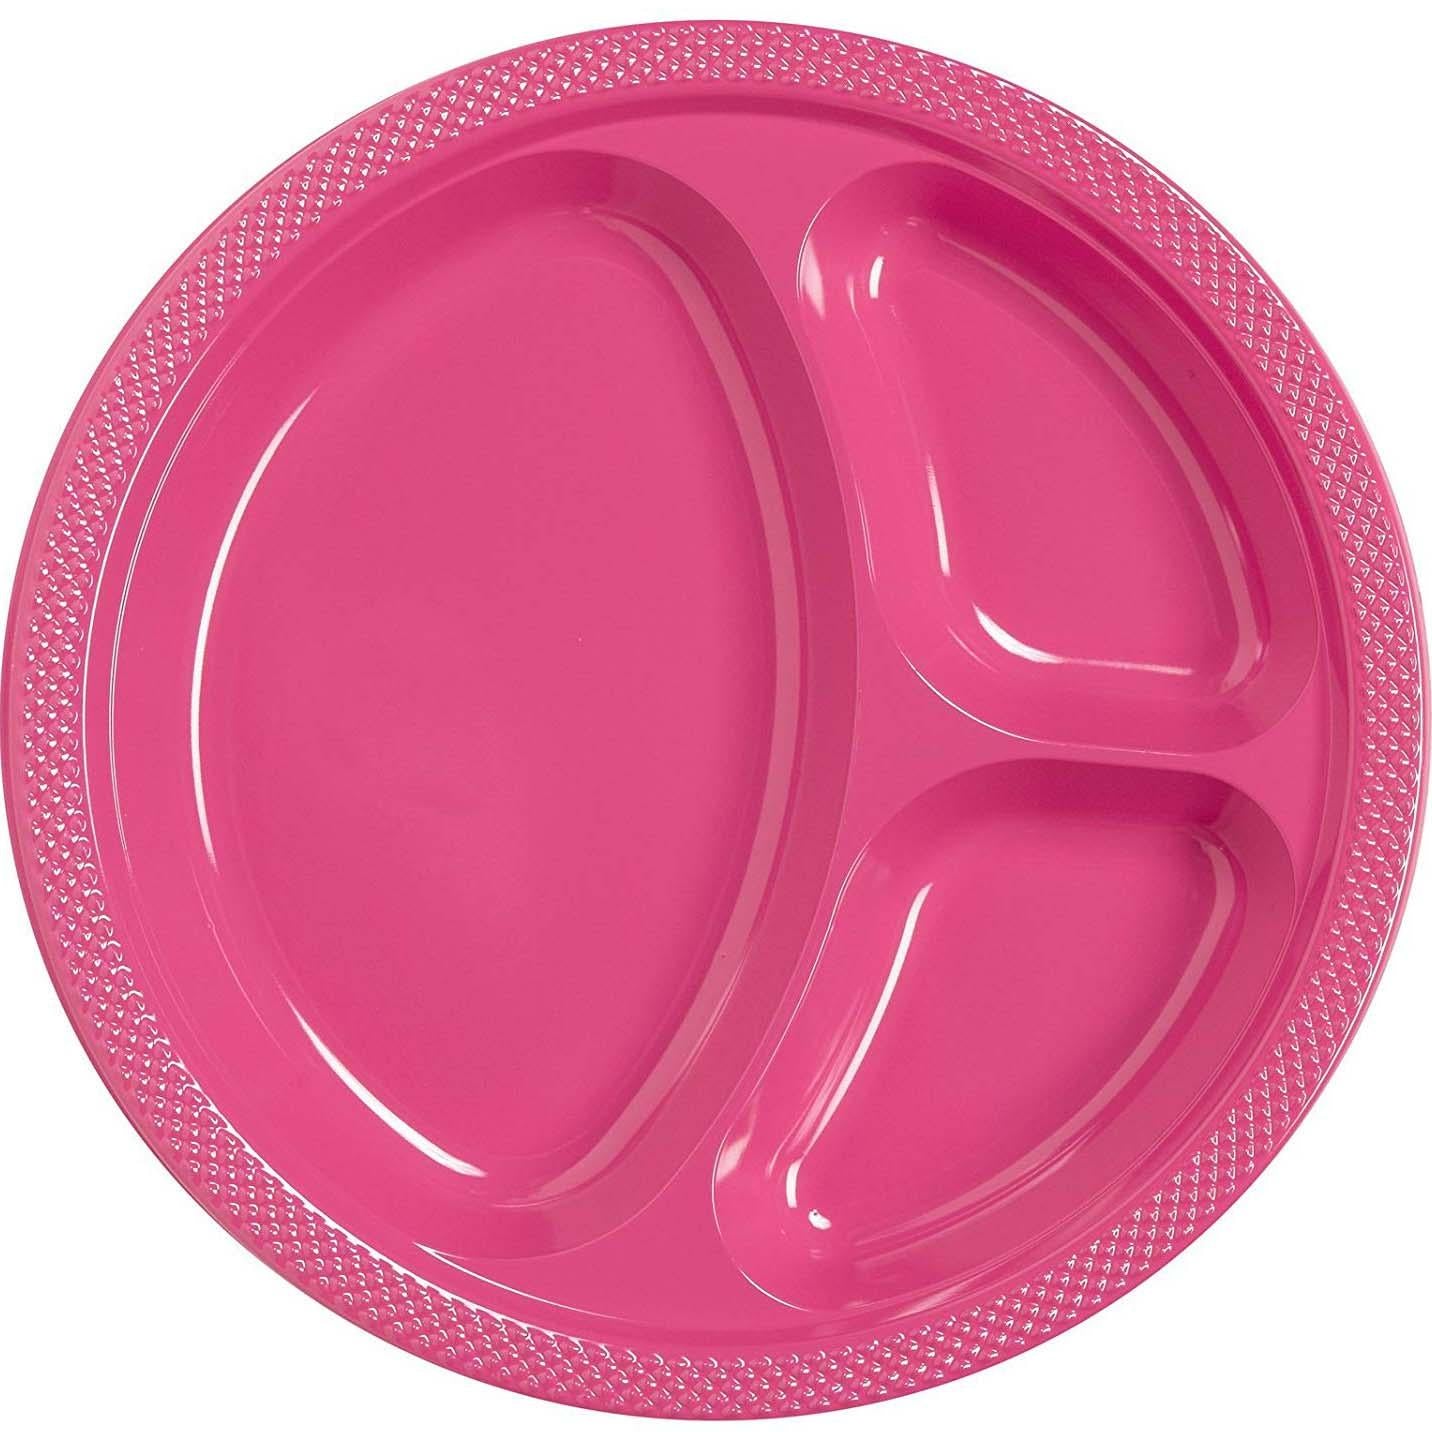 Magenta Divided Plastic Plates 10.25in, 20pcs Solid Tableware - Party Centre